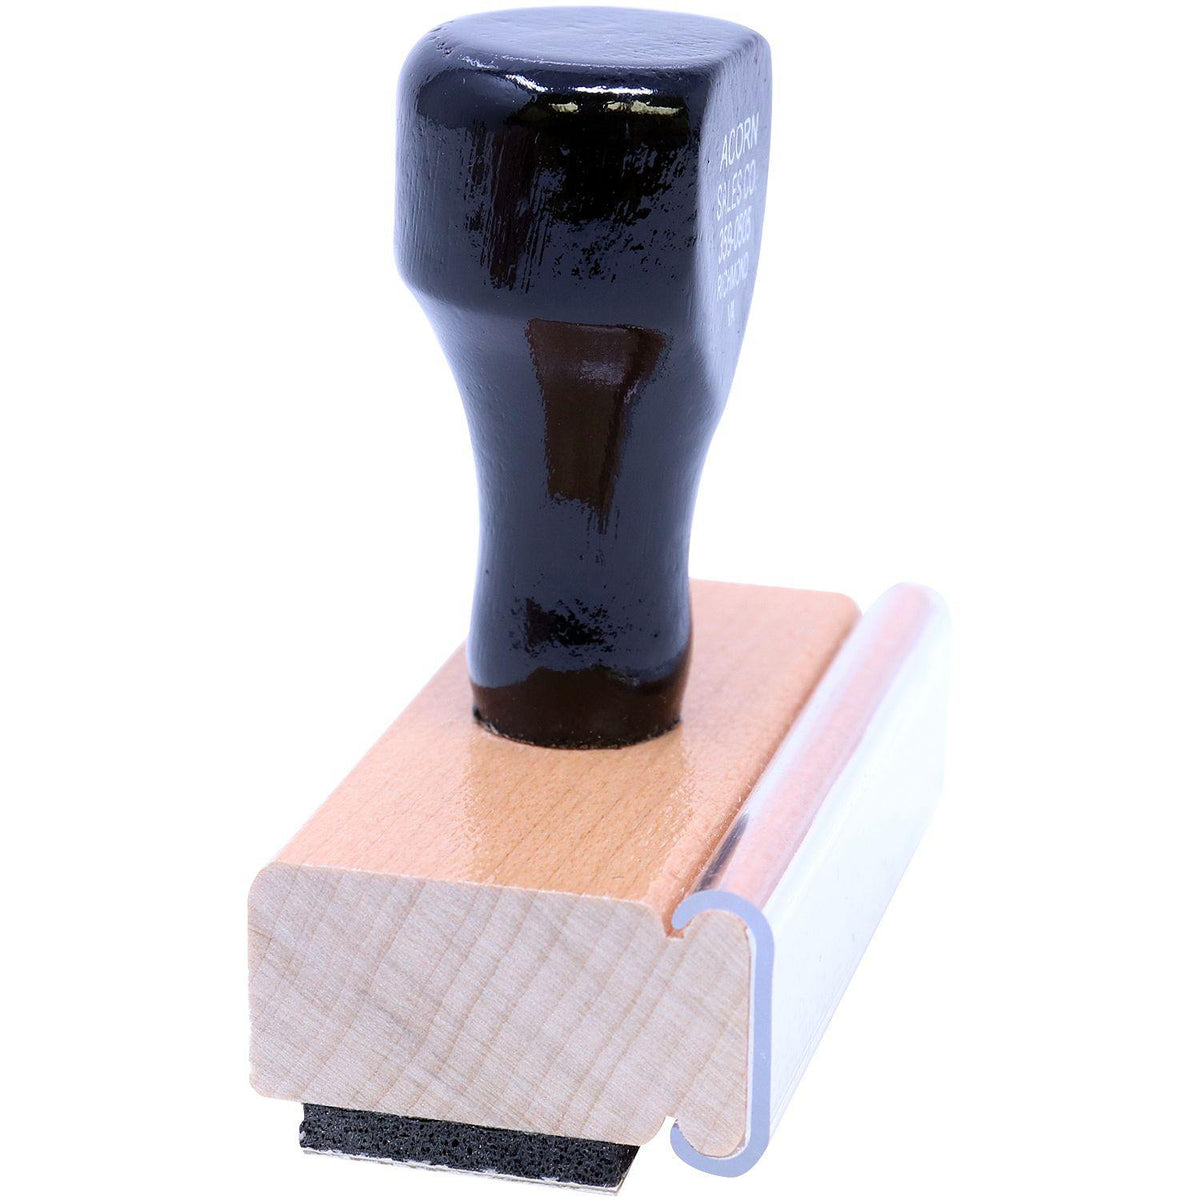 Large Skinny To the Parents of Rubber Stamp - Engineer Seal Stamps - Brand_Acorn, Impression Size_Large, Stamp Type_Regular Stamp, Type of Use_Teacher